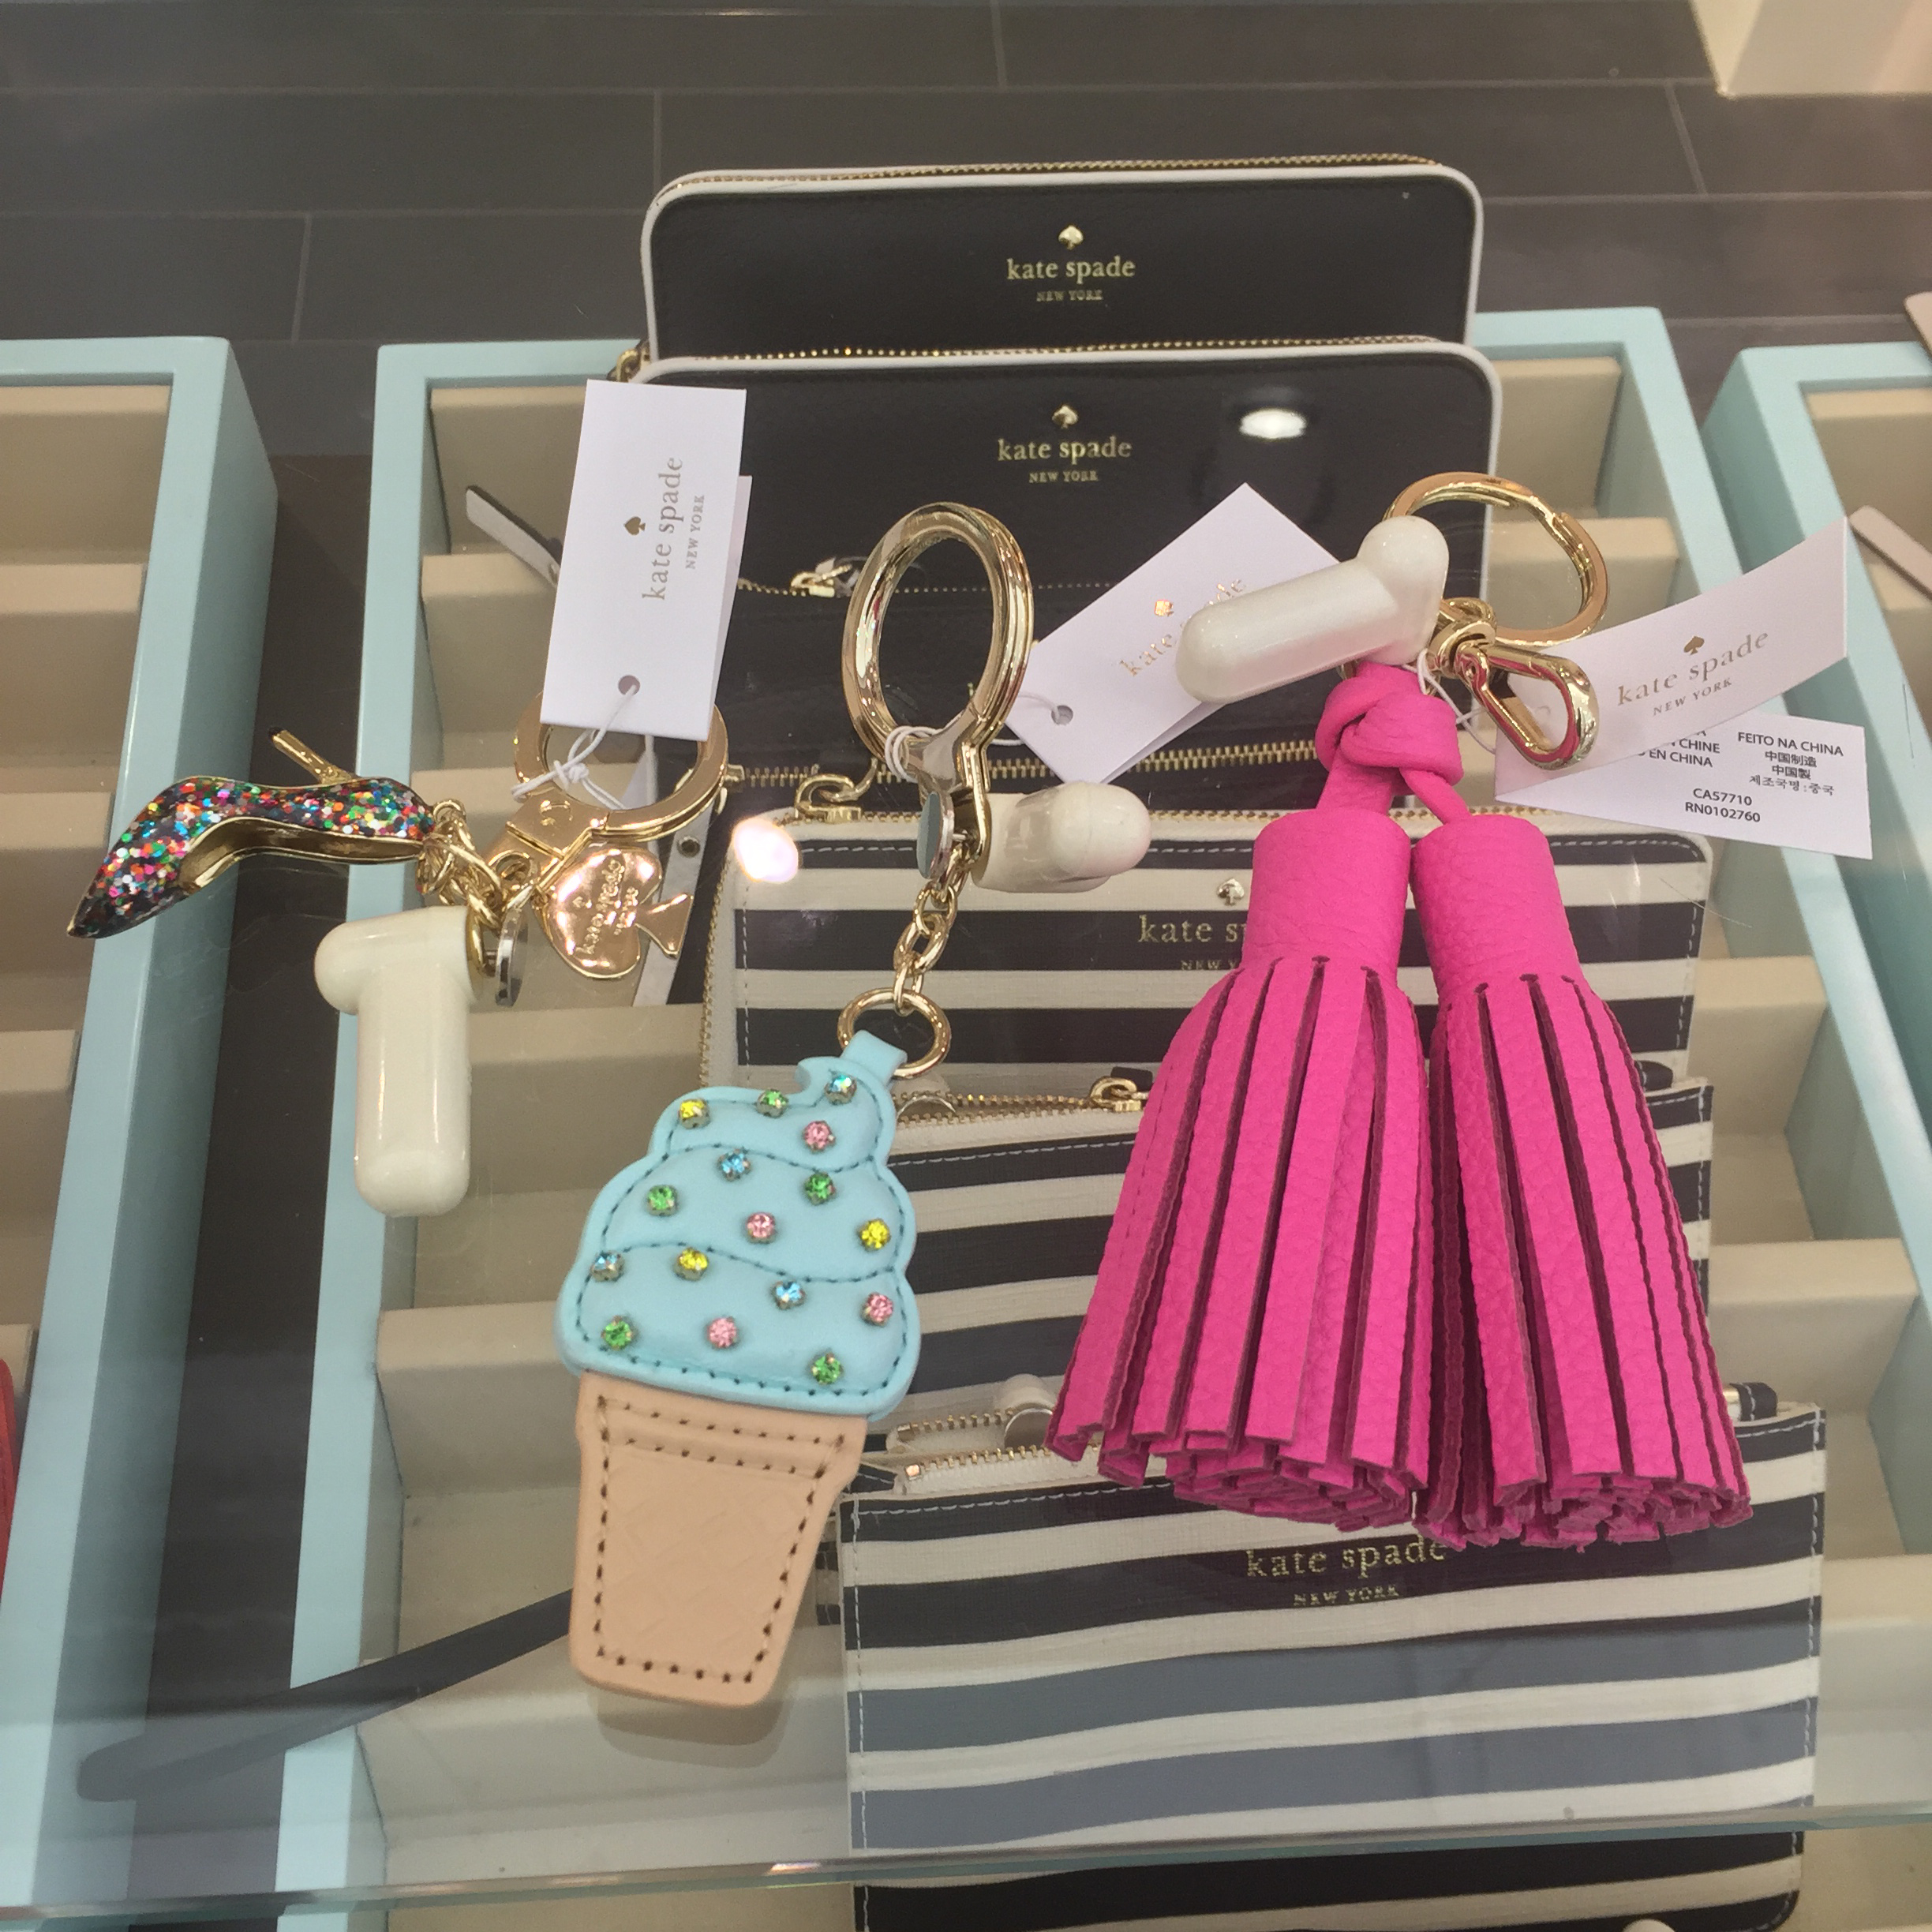 Kate Spade Opens First Shop in the City of Lights - Paris,France